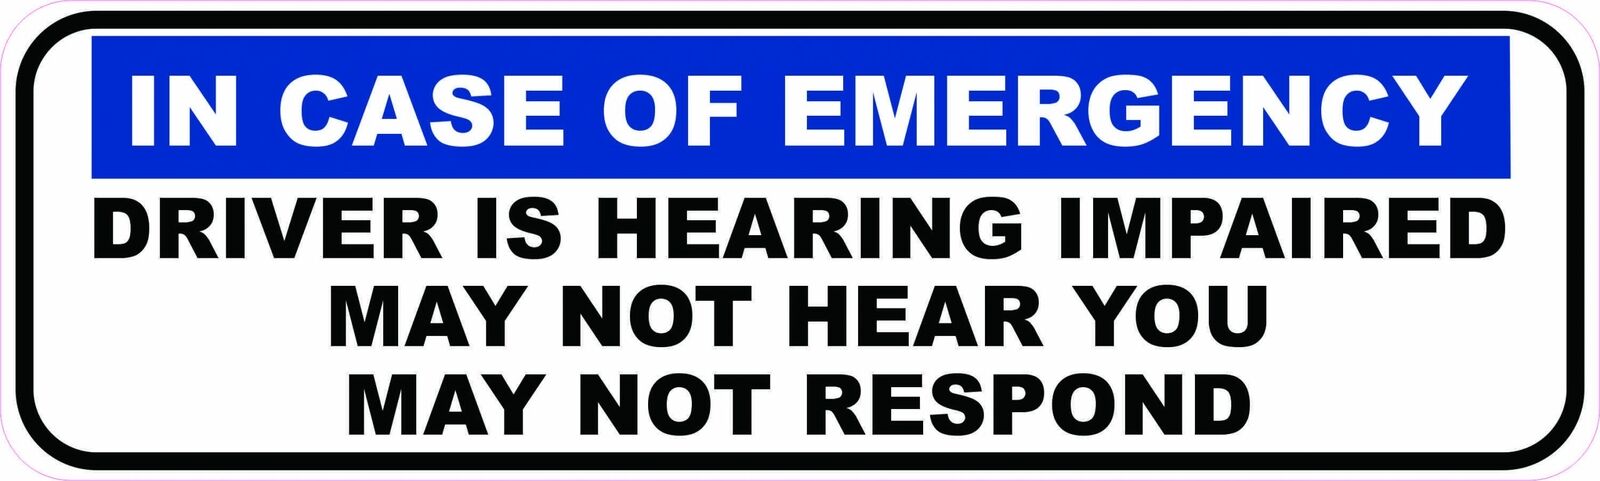 10in x 3in Driver Is Hearing Impaired Vinyl Sticker Car Vehicle Bumper Decal